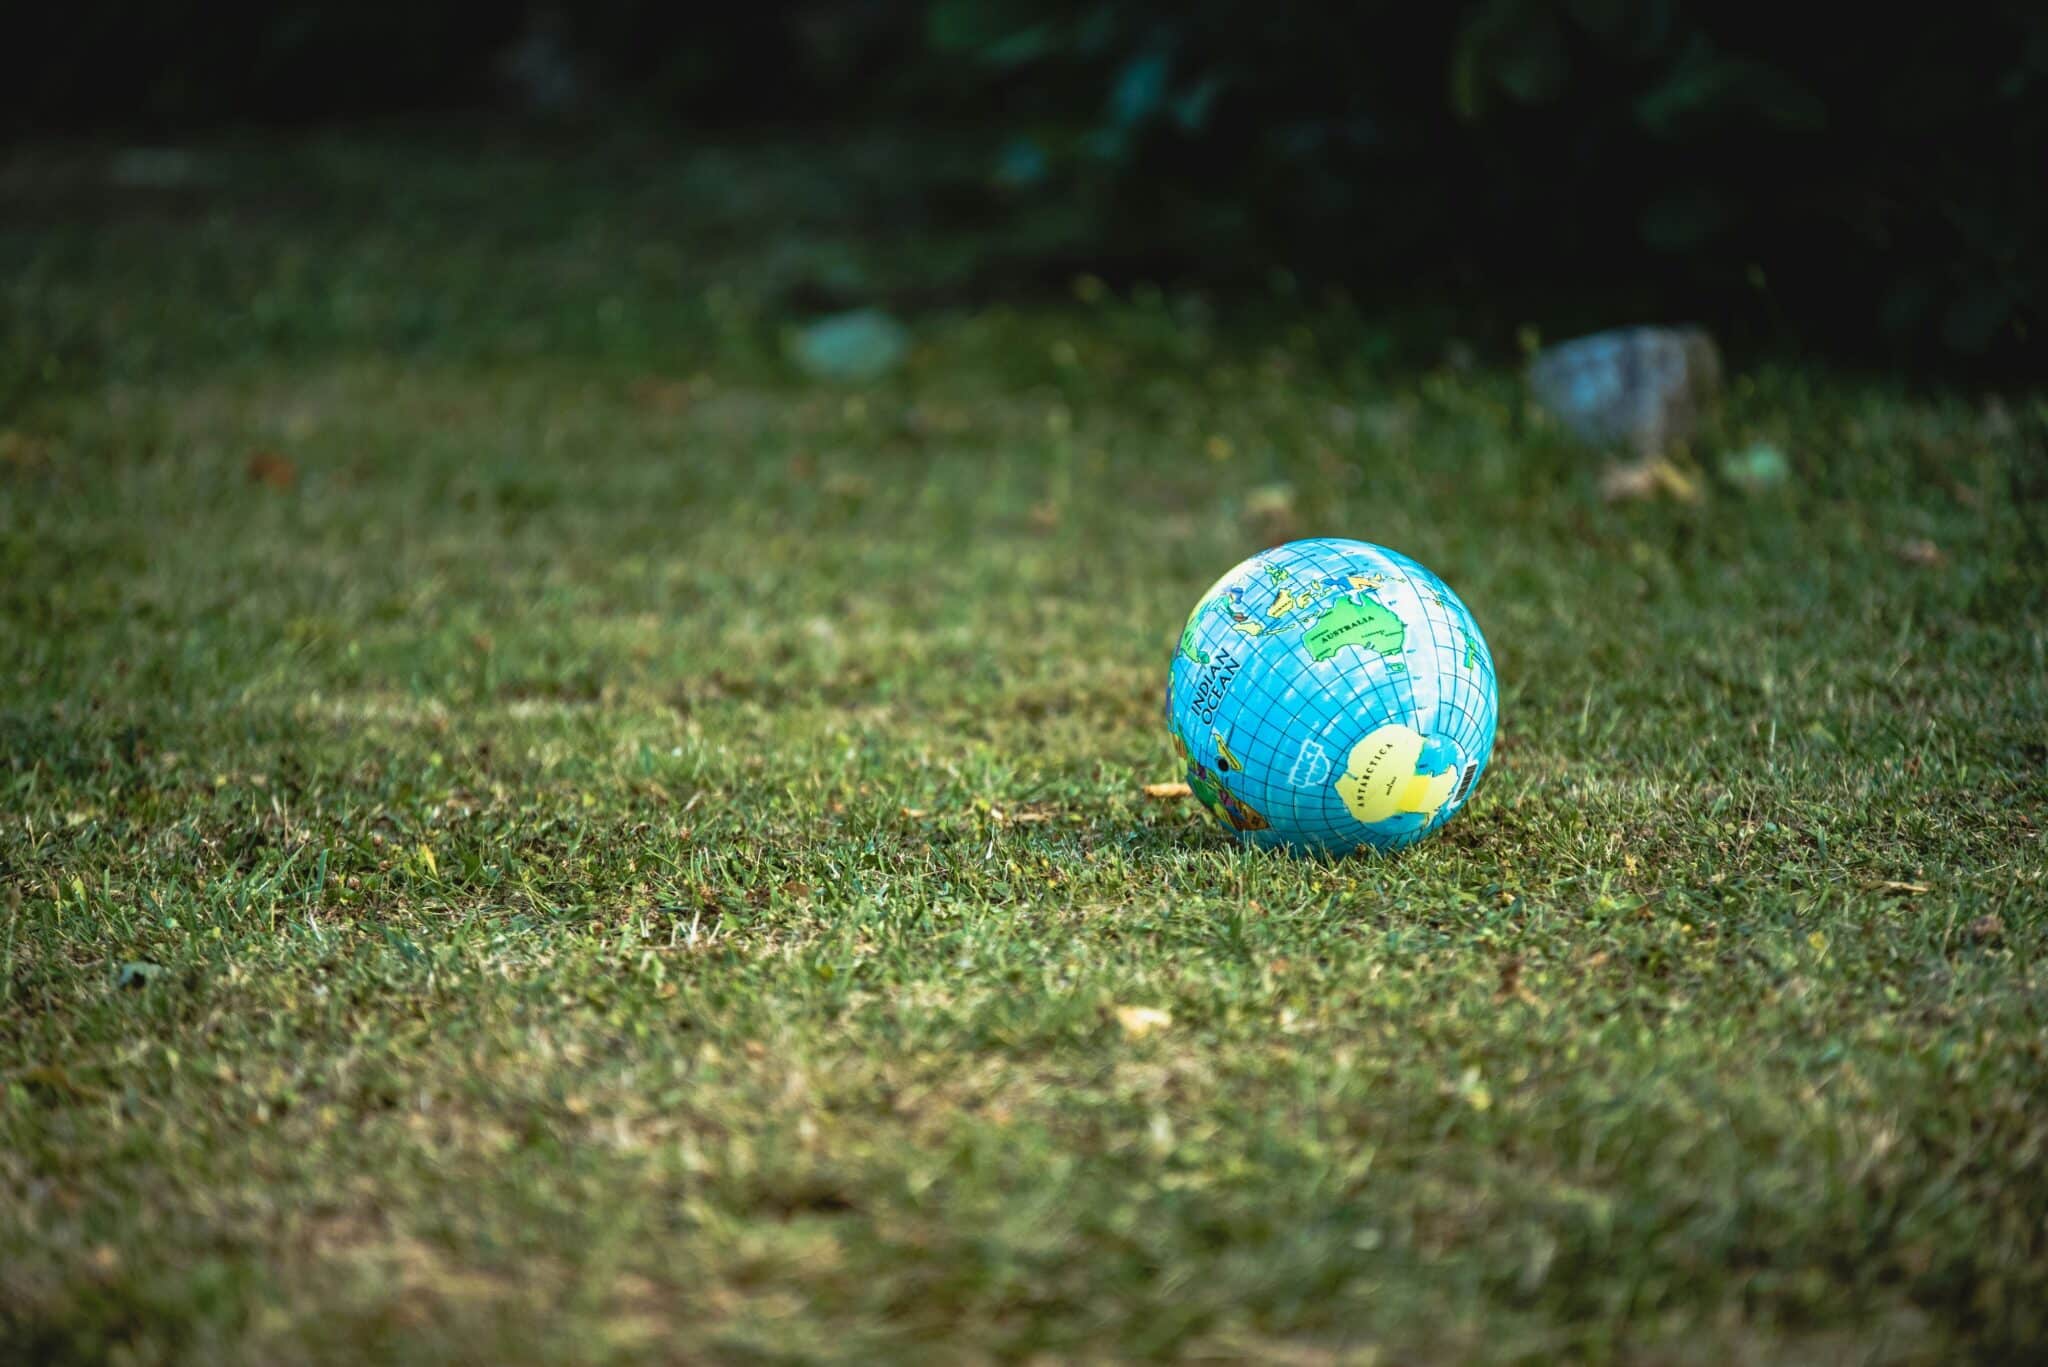 Globes on the ground | Photo by Guillaume de Germain on Unsplash